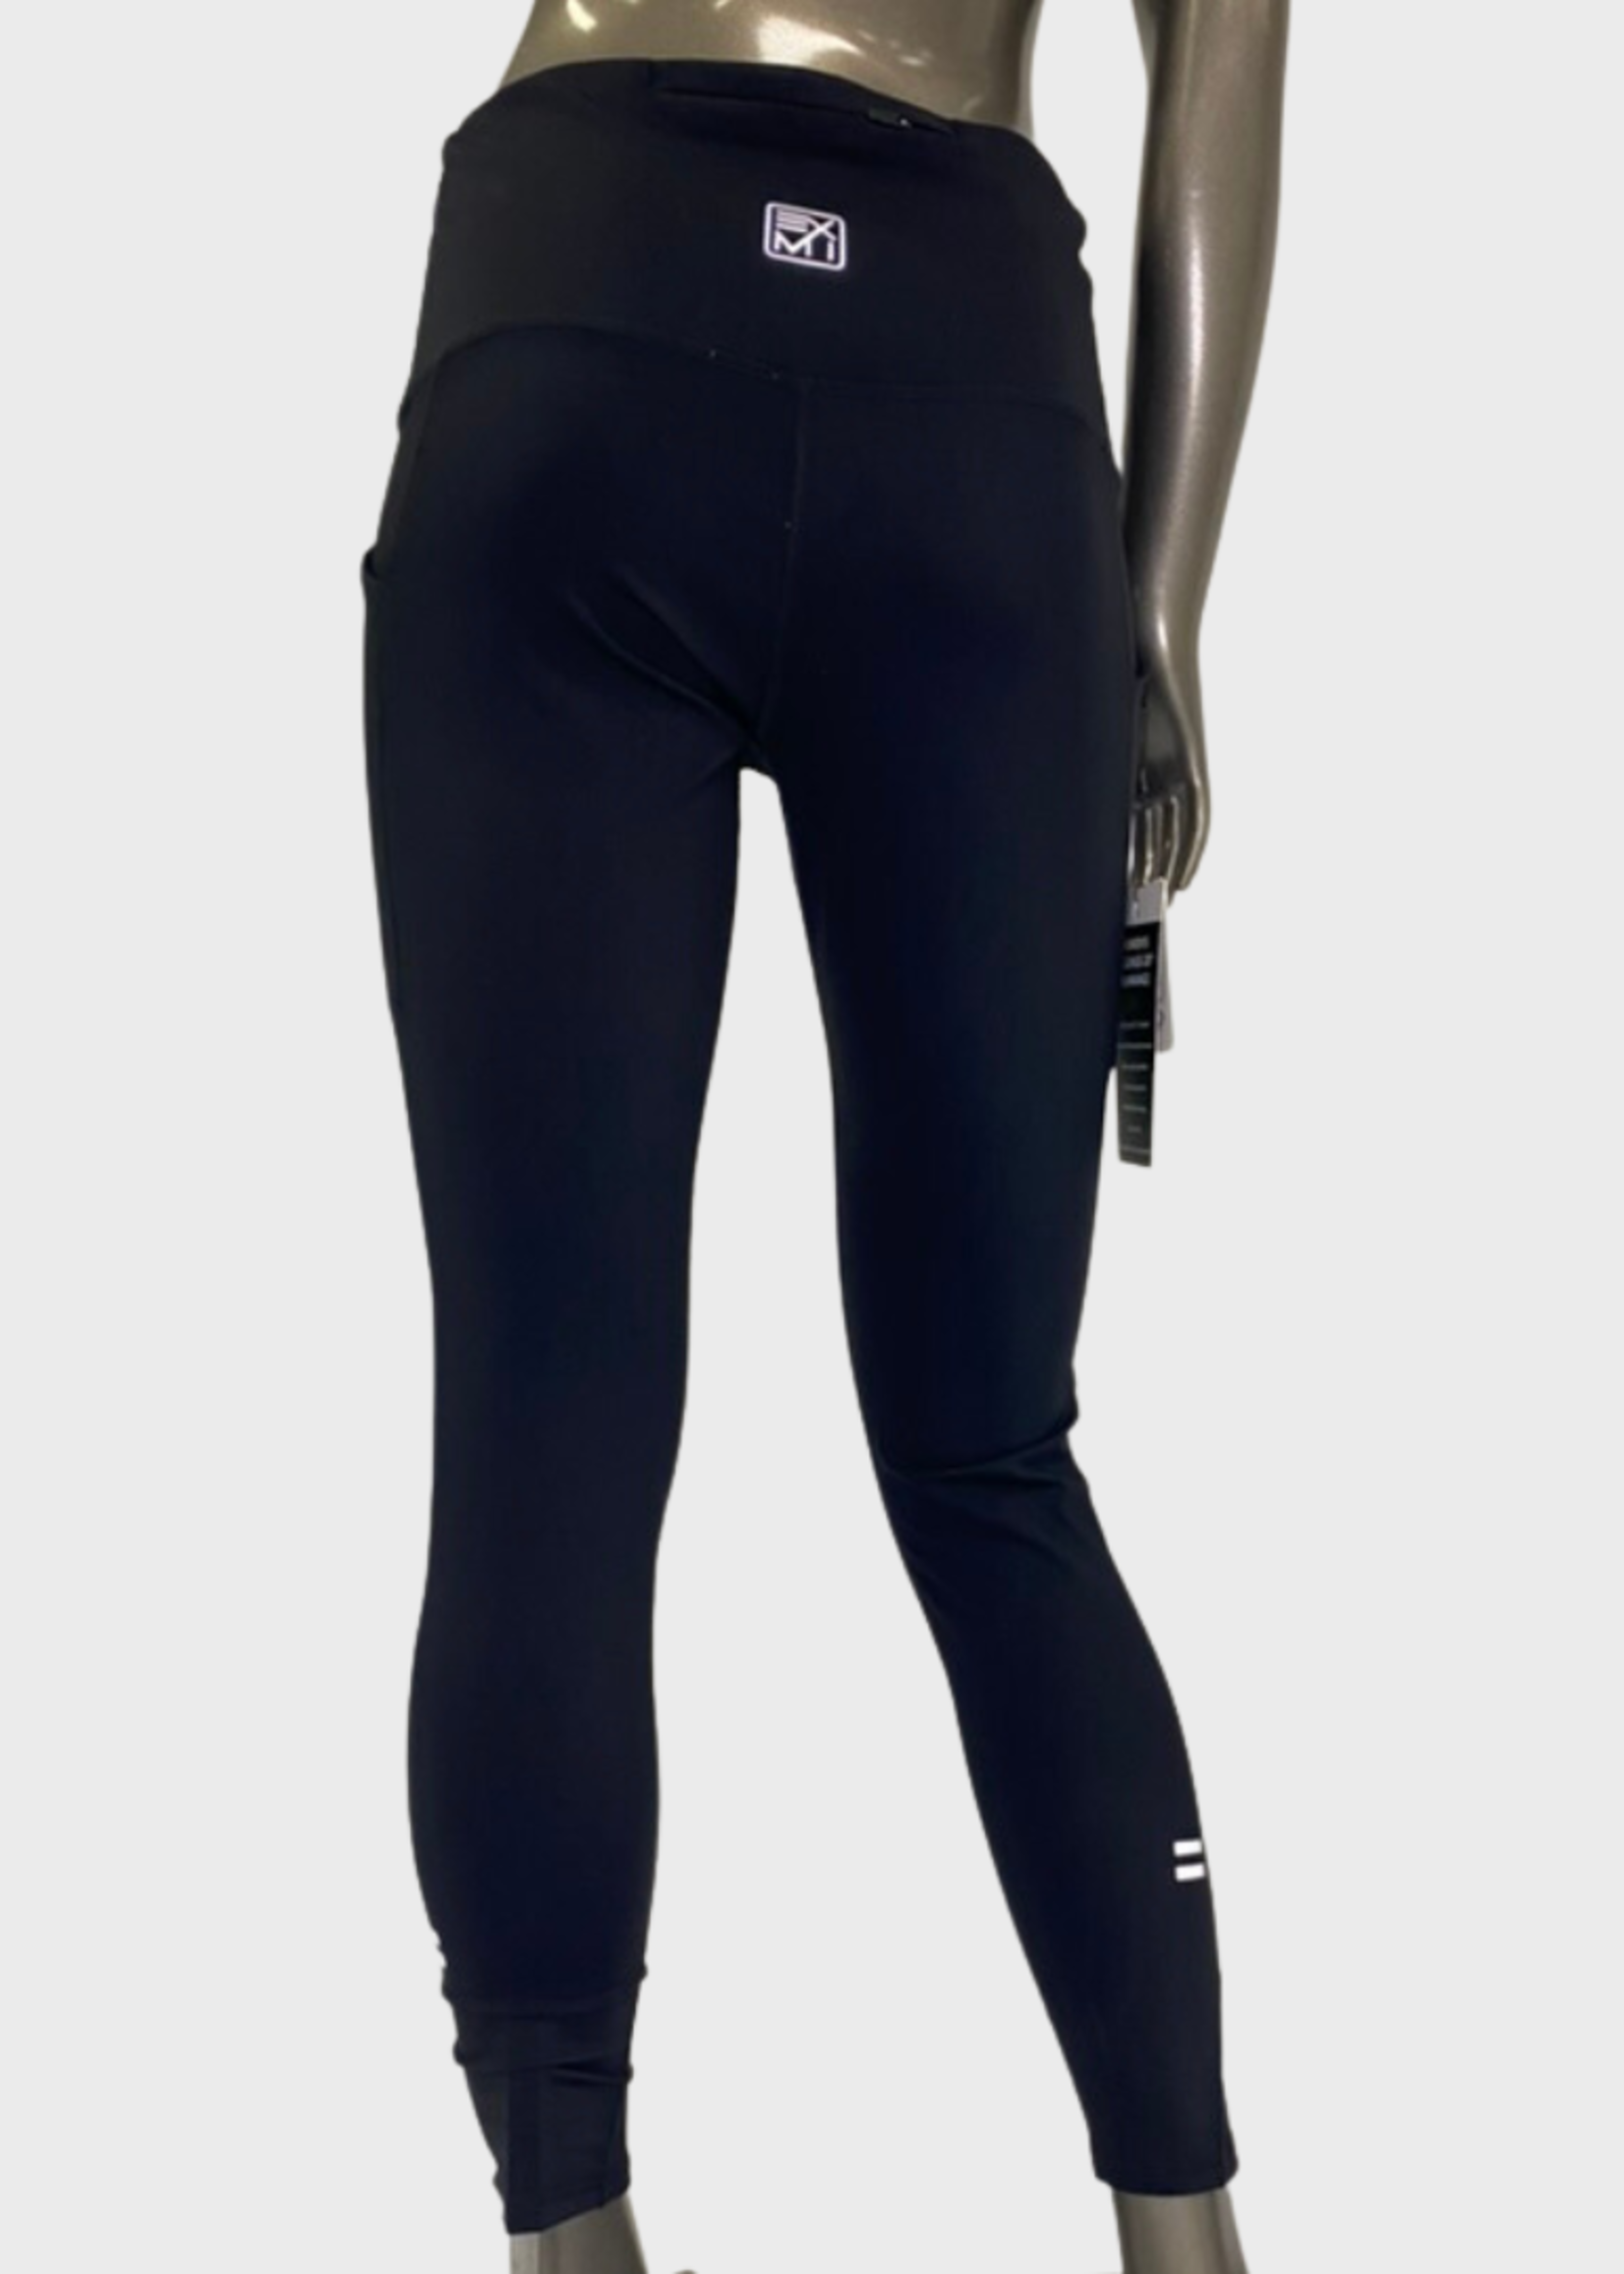 EXTRA  MILE WOMEN'S BRUSHED RUNNING TIGHT